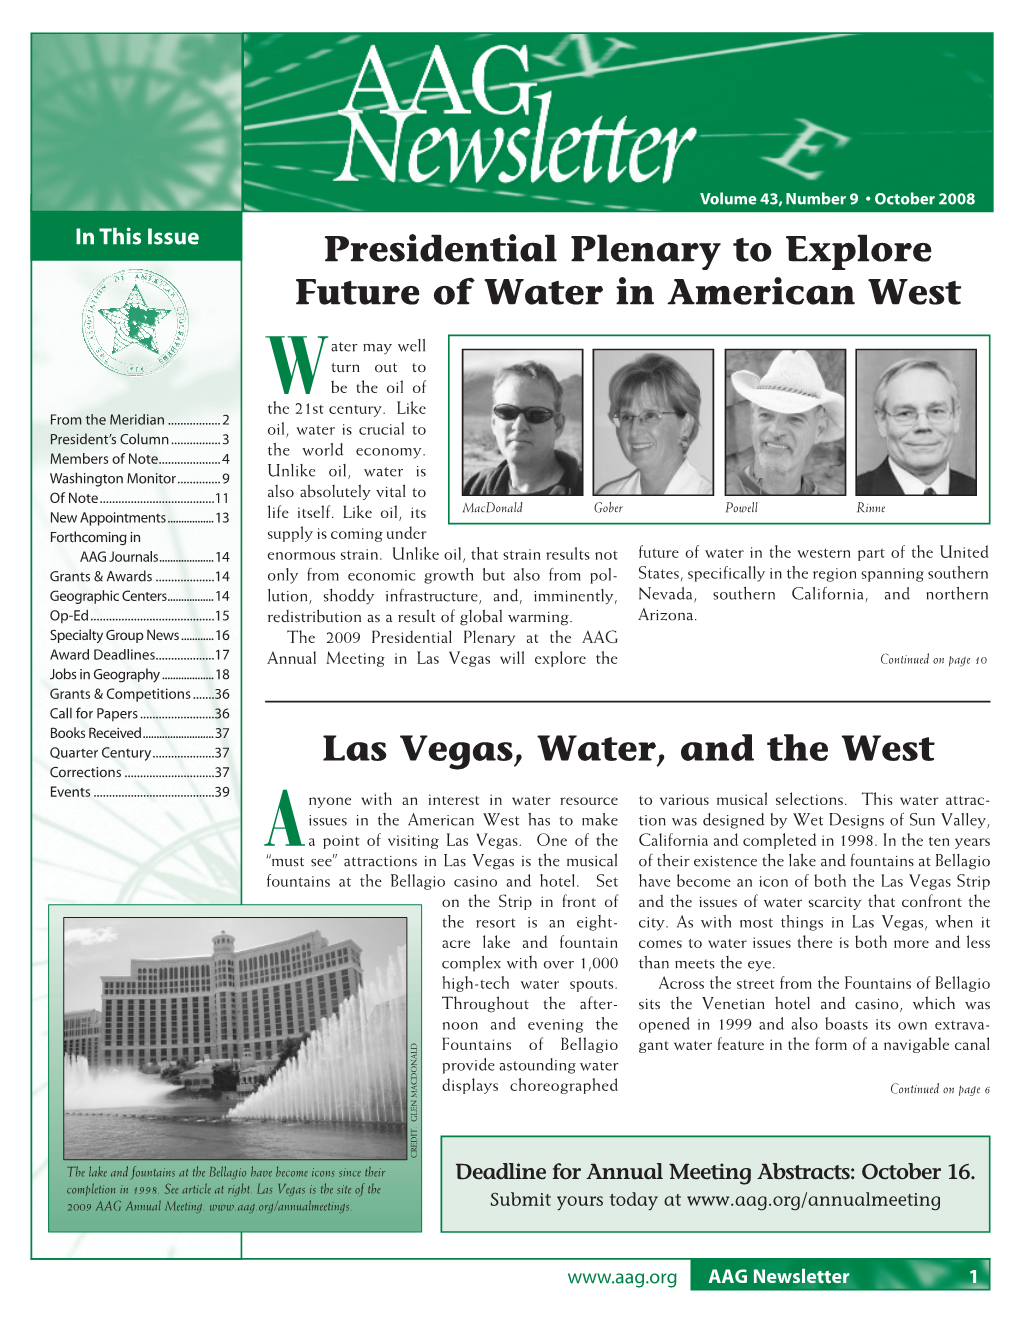 Presidential Plenary to Explore Future of Water in American West Las Vegas, Water, and the West